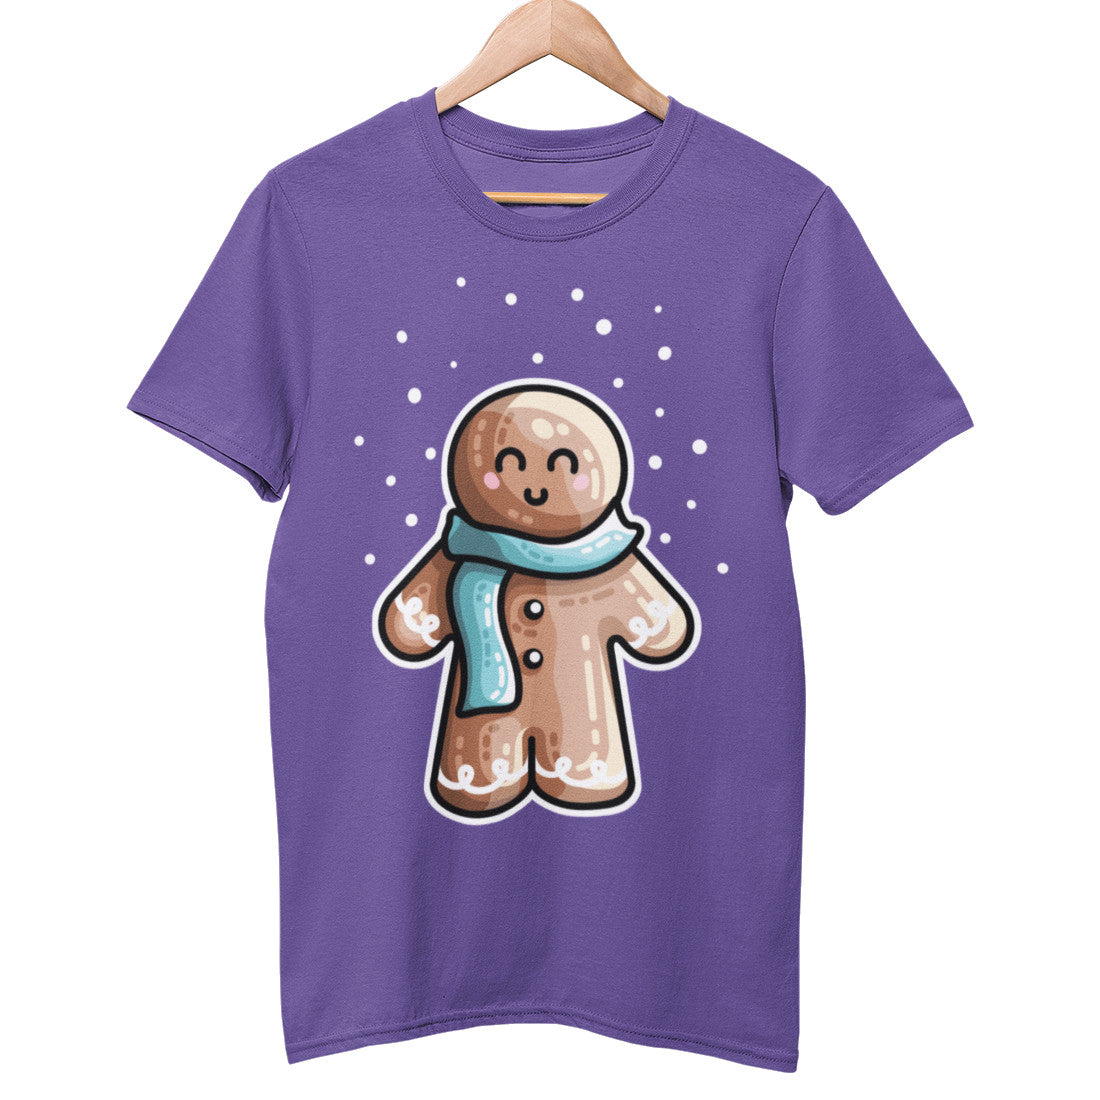 A purple unisex crewneck t-shirt on a hanger with a design of a kawaii cute gingerbread person standing in the snow and wearing a blue scarf